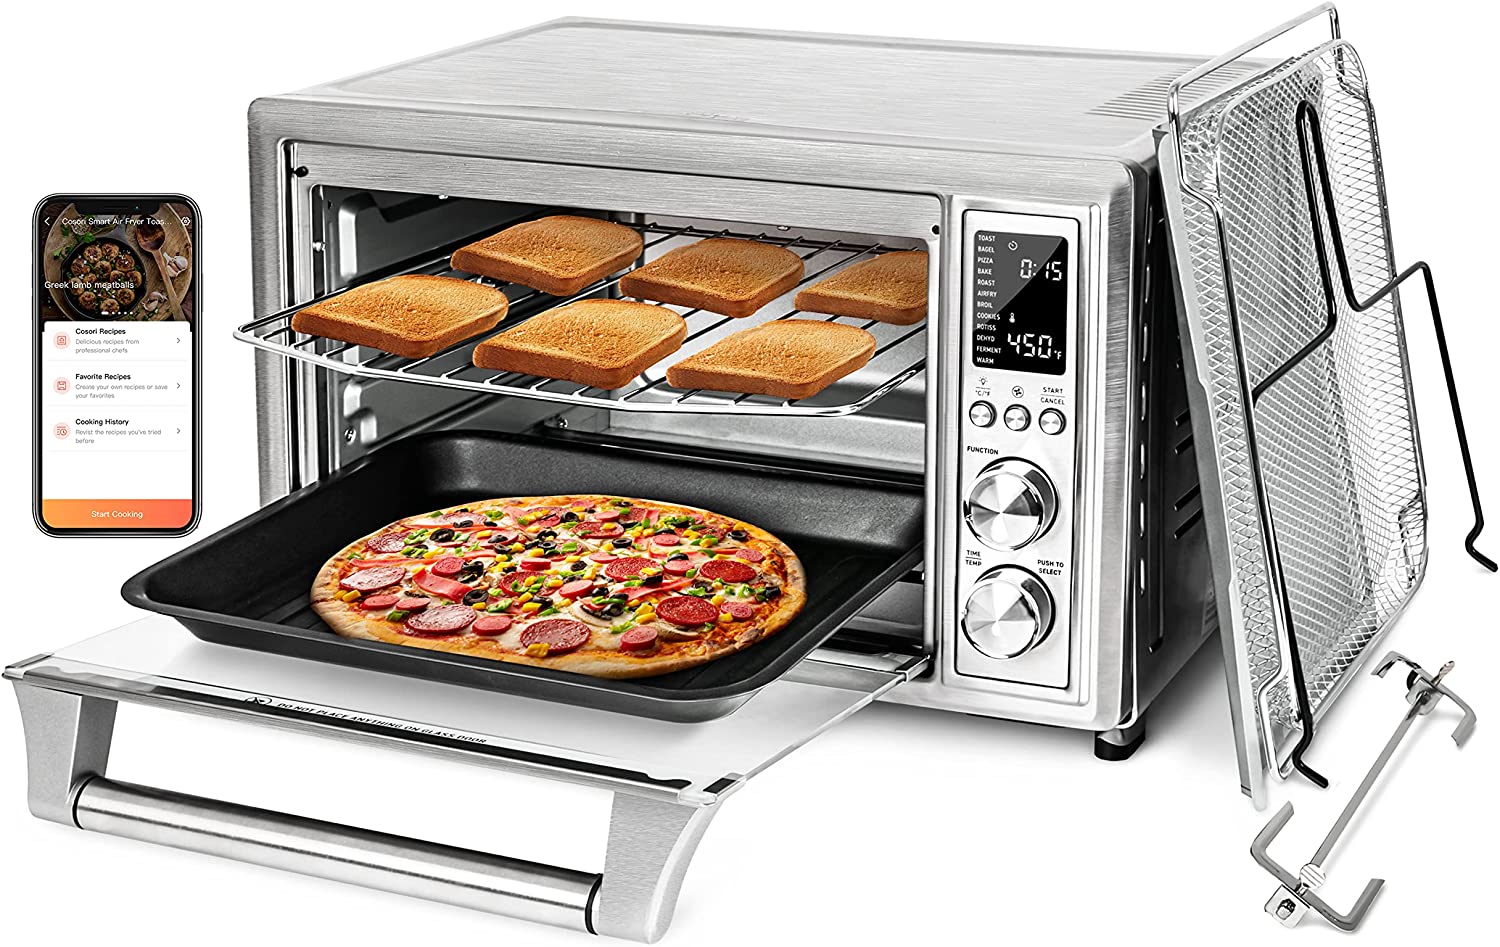 COSORI Air Fryer Toaster Oven Combo, 12-in-1 Convection Ovens Countertop, Stainless Steel, Smart, 6-Slice Toast, 12-inch Pizza, with Bake, Roast, Broil, 75 Recipes&Accessories Tray, Basket, 26.4QT